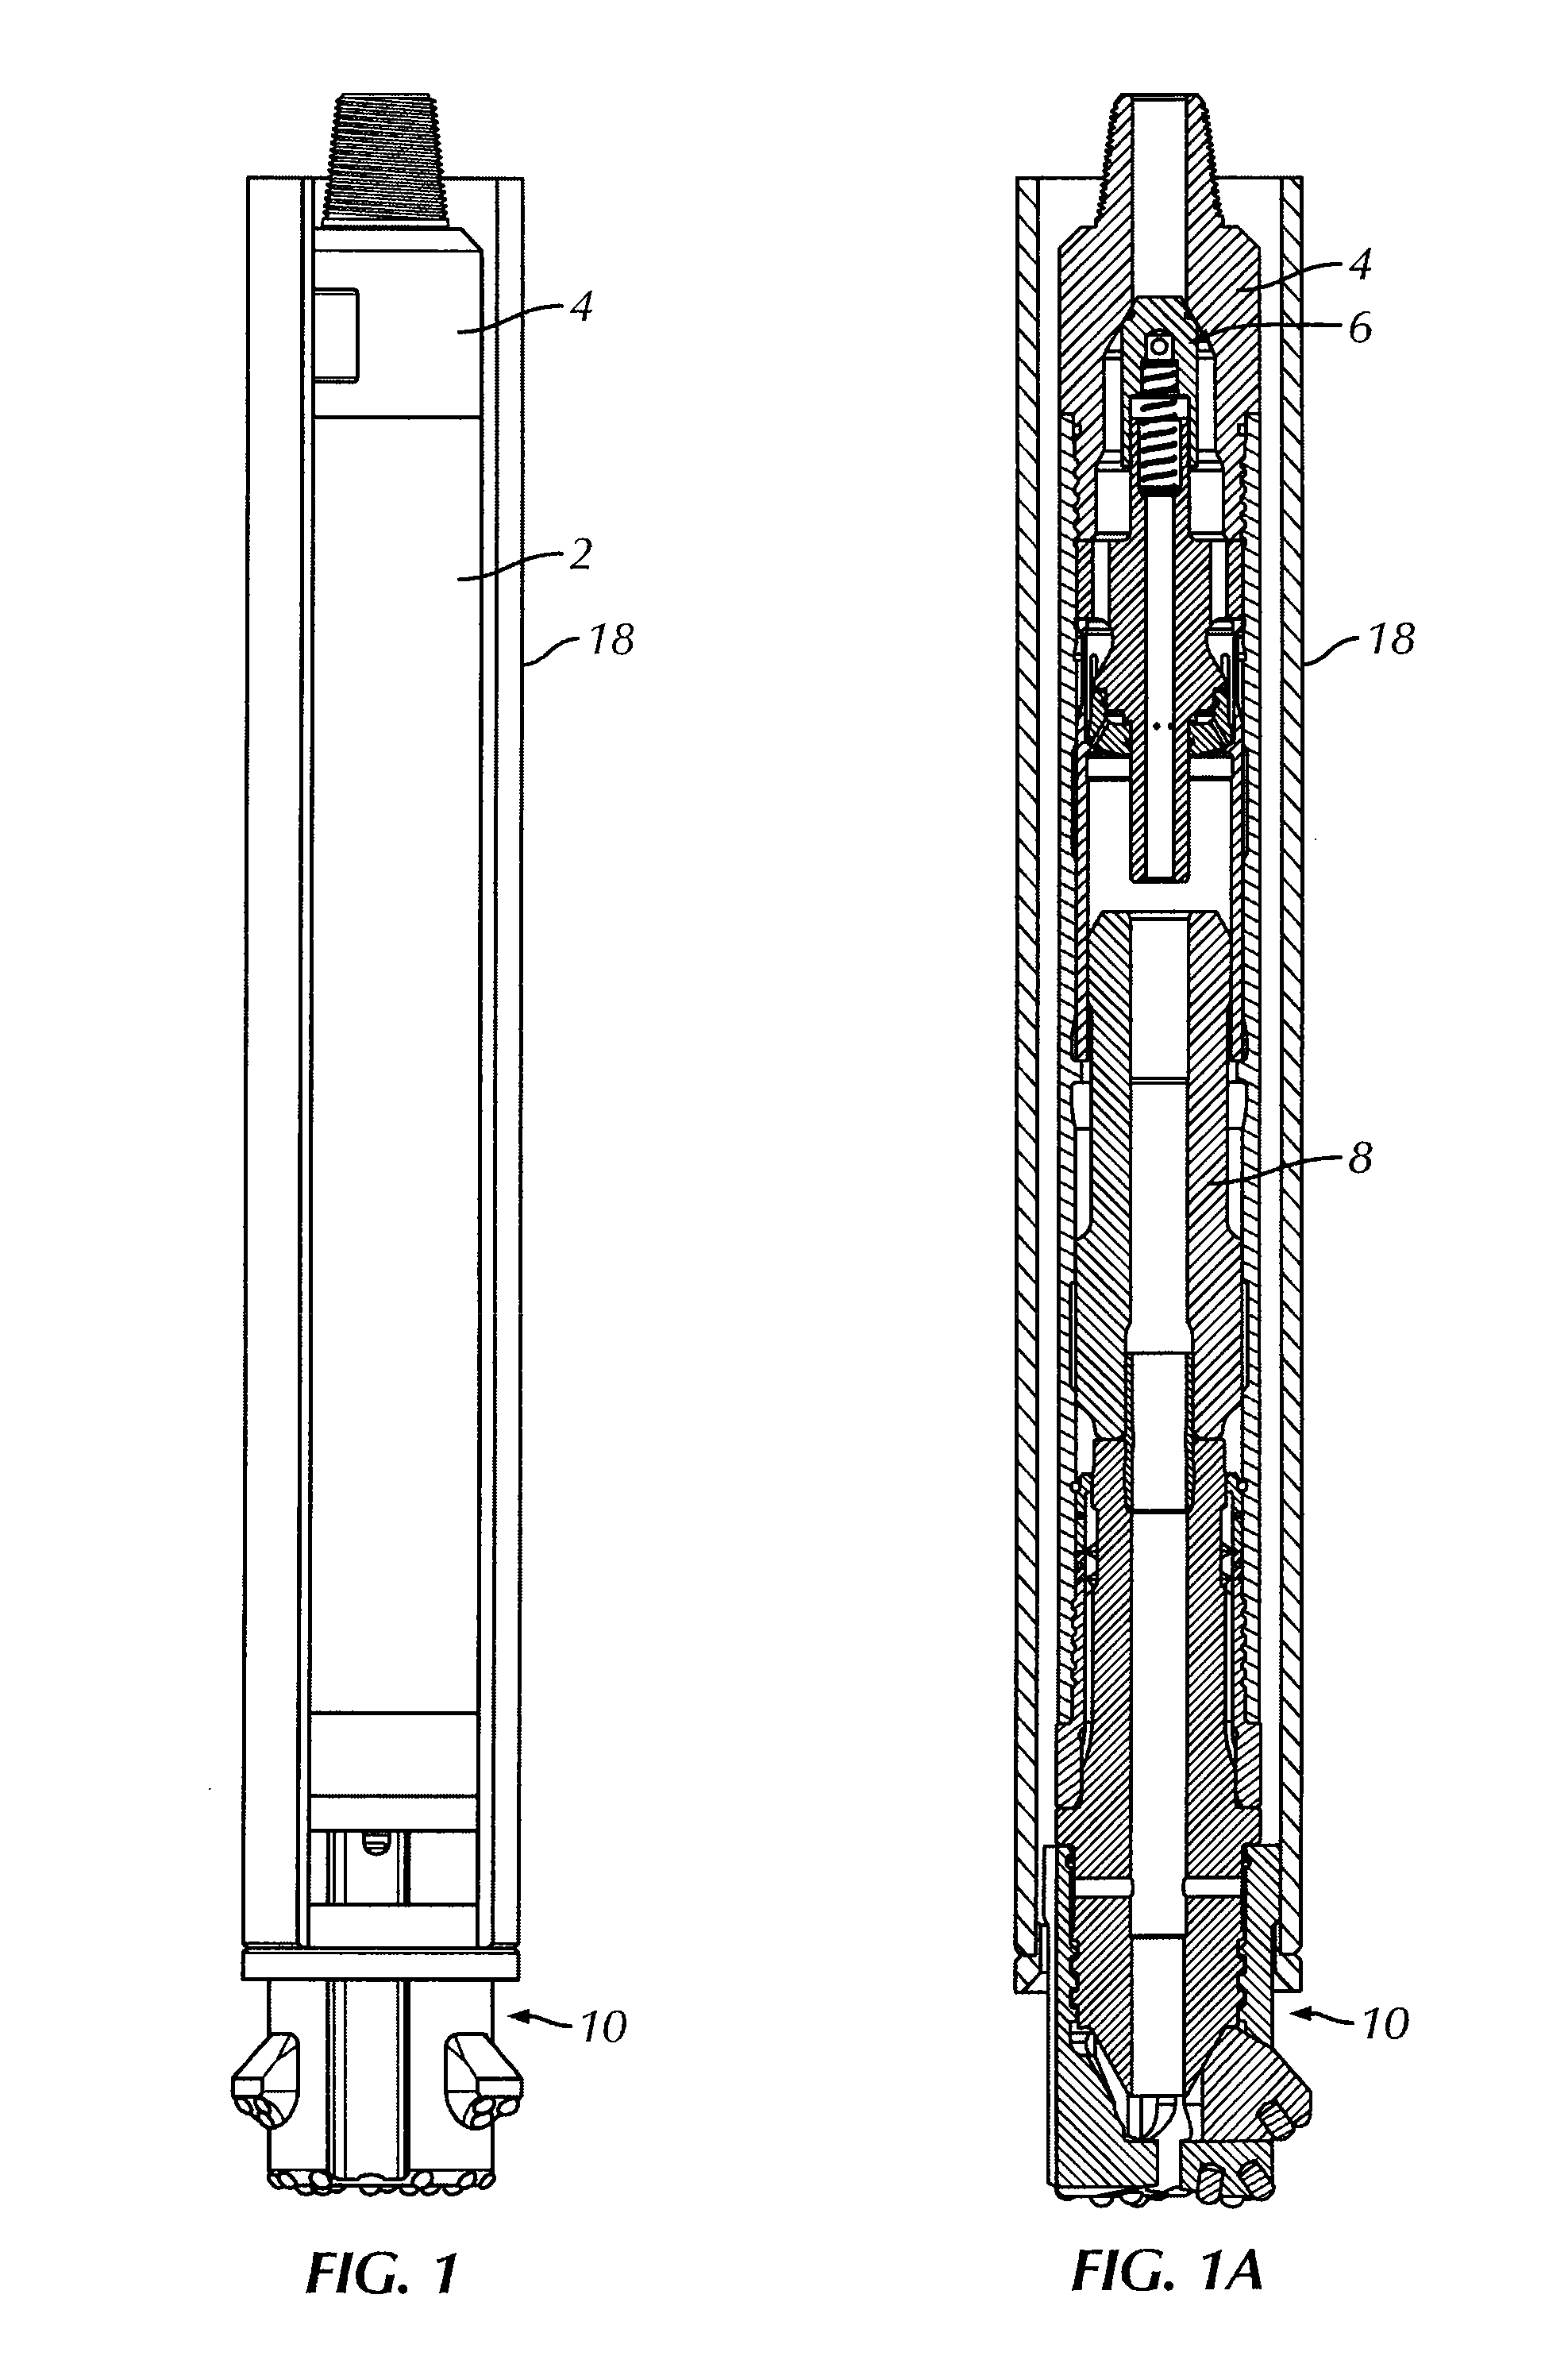 Down-the-hole drill hammer having an extendable drill bit assembly